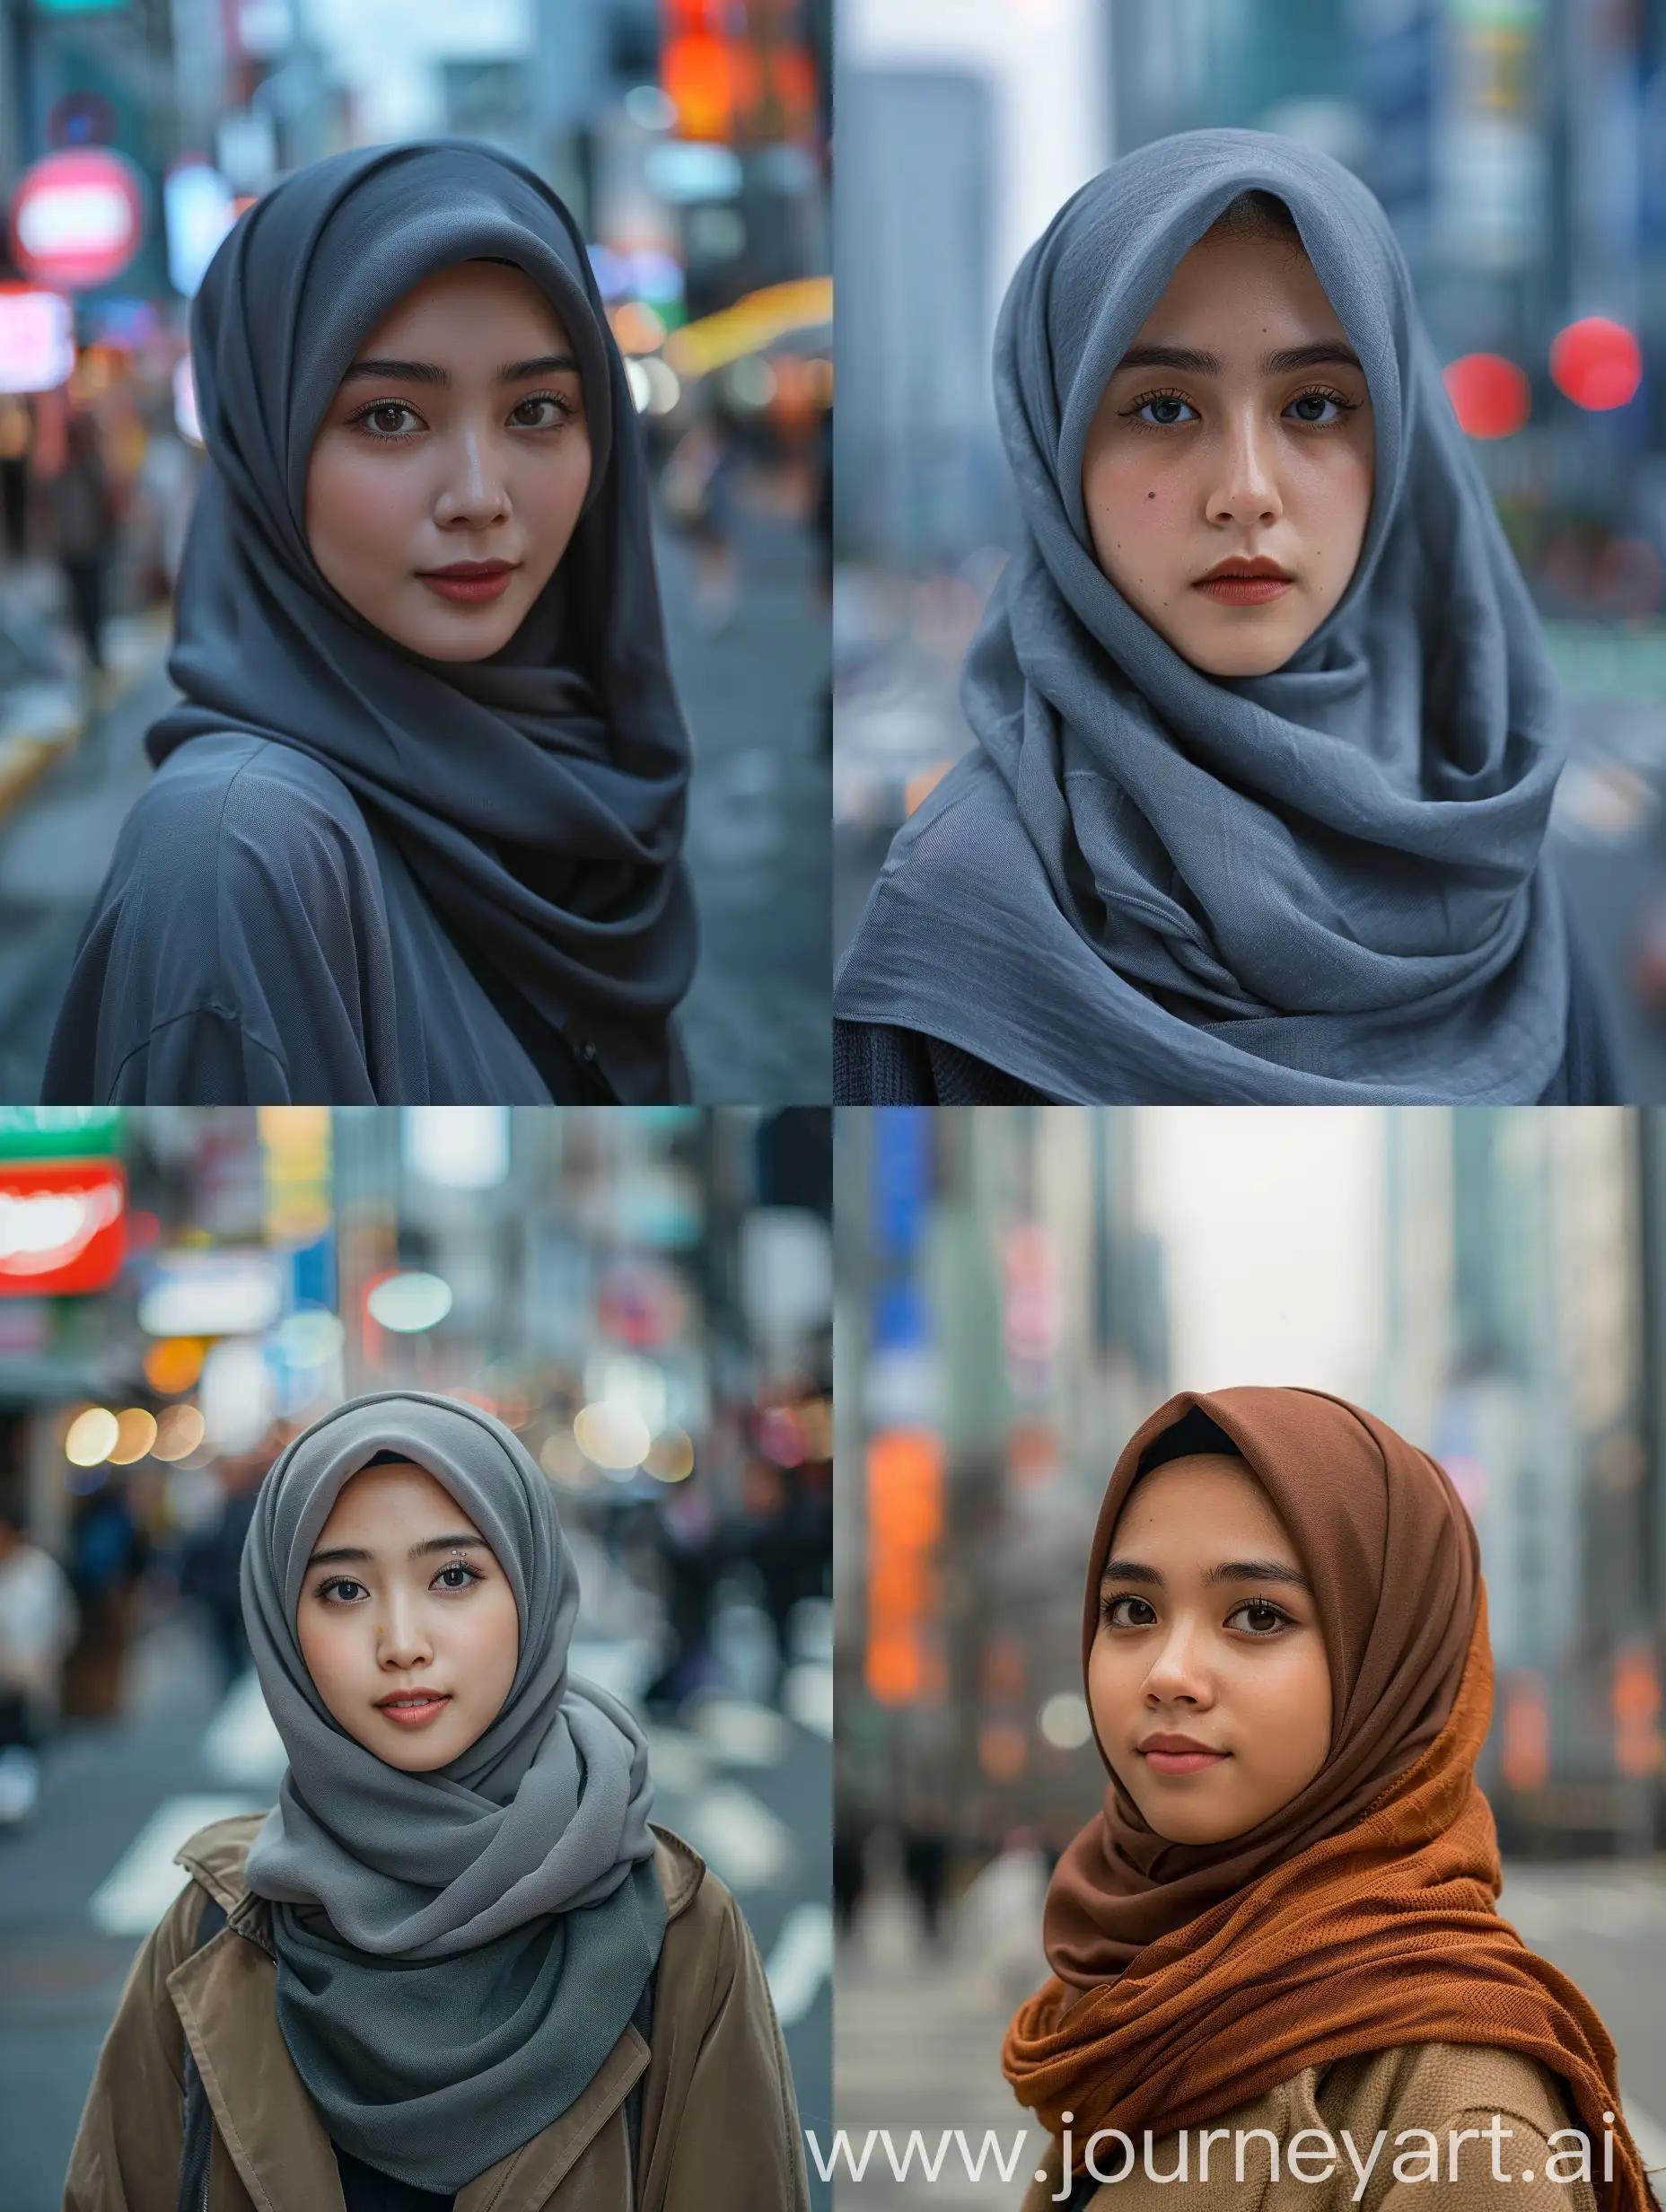 Potret.Tokyo Airbnb Travel And leisure magazine photo, stunning beautiful indonesian girl wearinf hijab, sony A7III, candid, multiple subject, diverse, TikTok, unstock